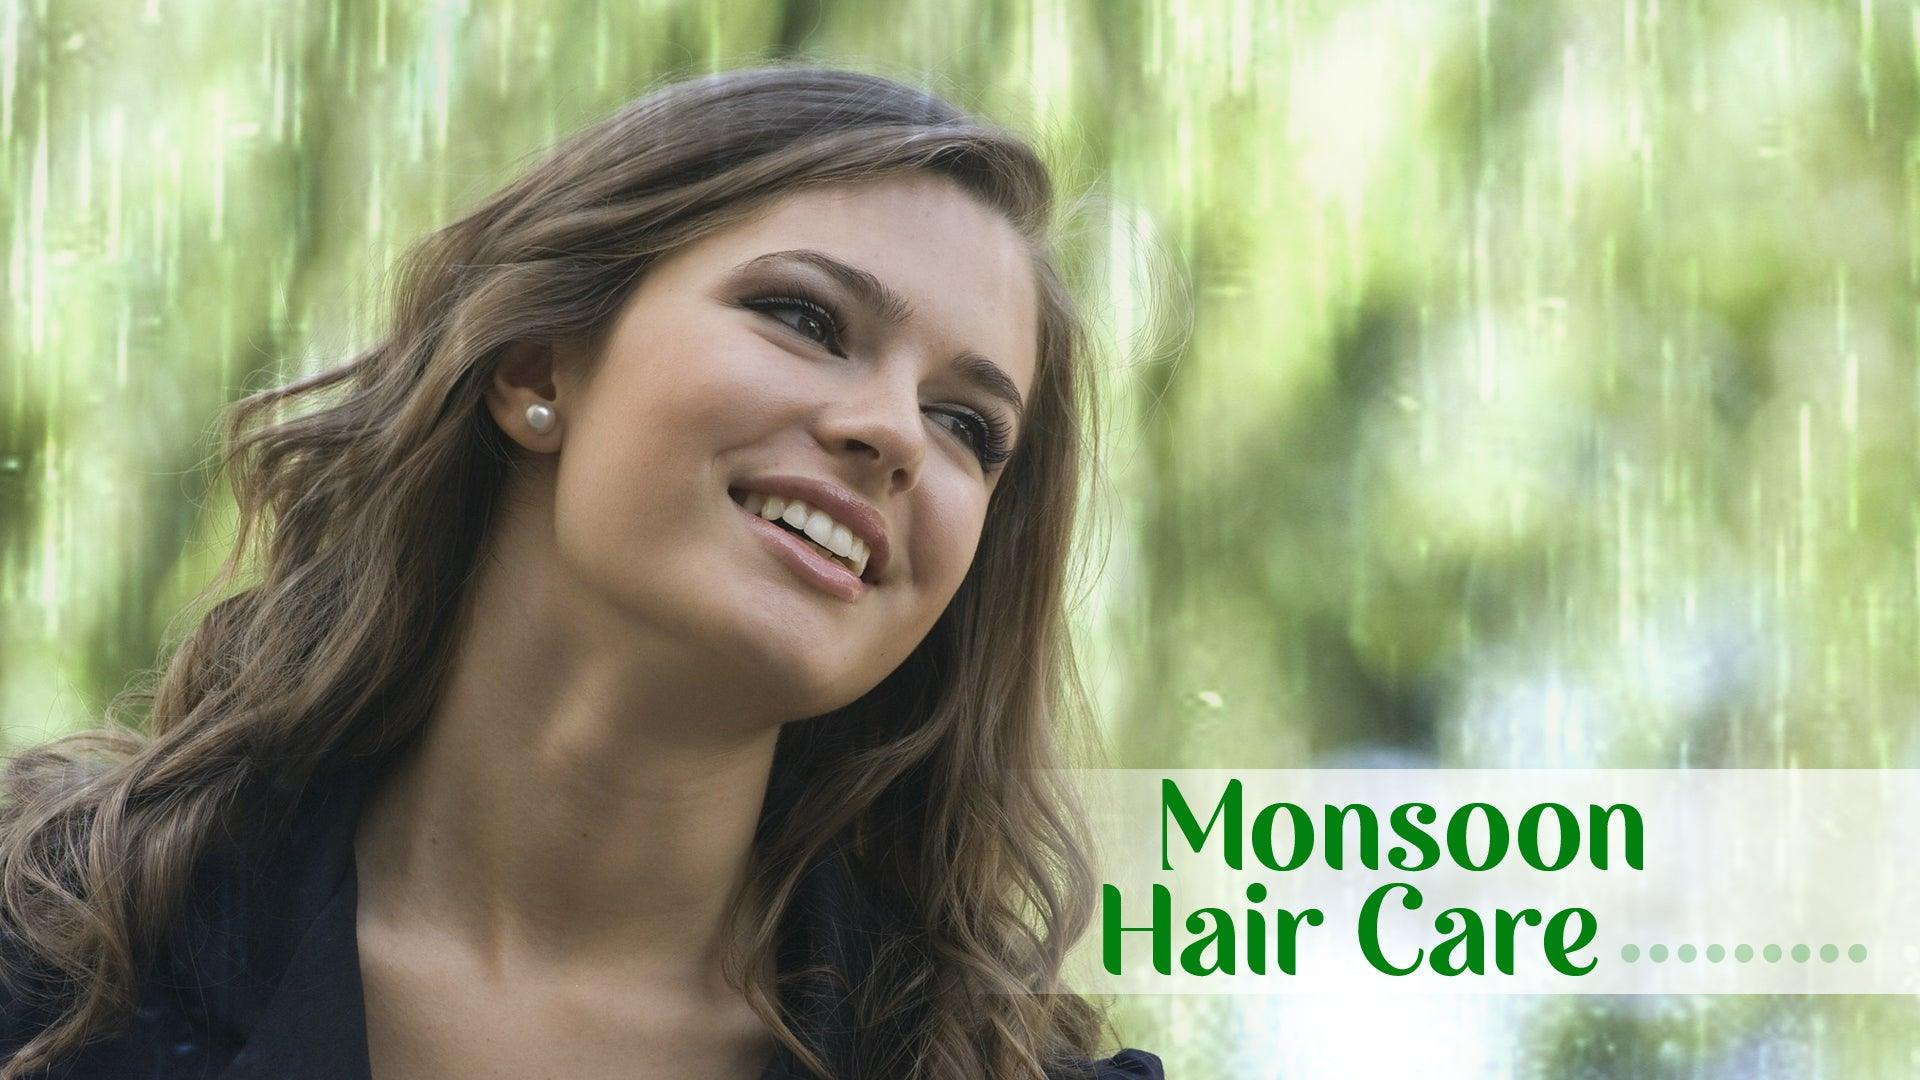 Top 5 Monsoon Hair Care Tips To Keep Your Tresses Healthy and Strong - aaranyaa skincare